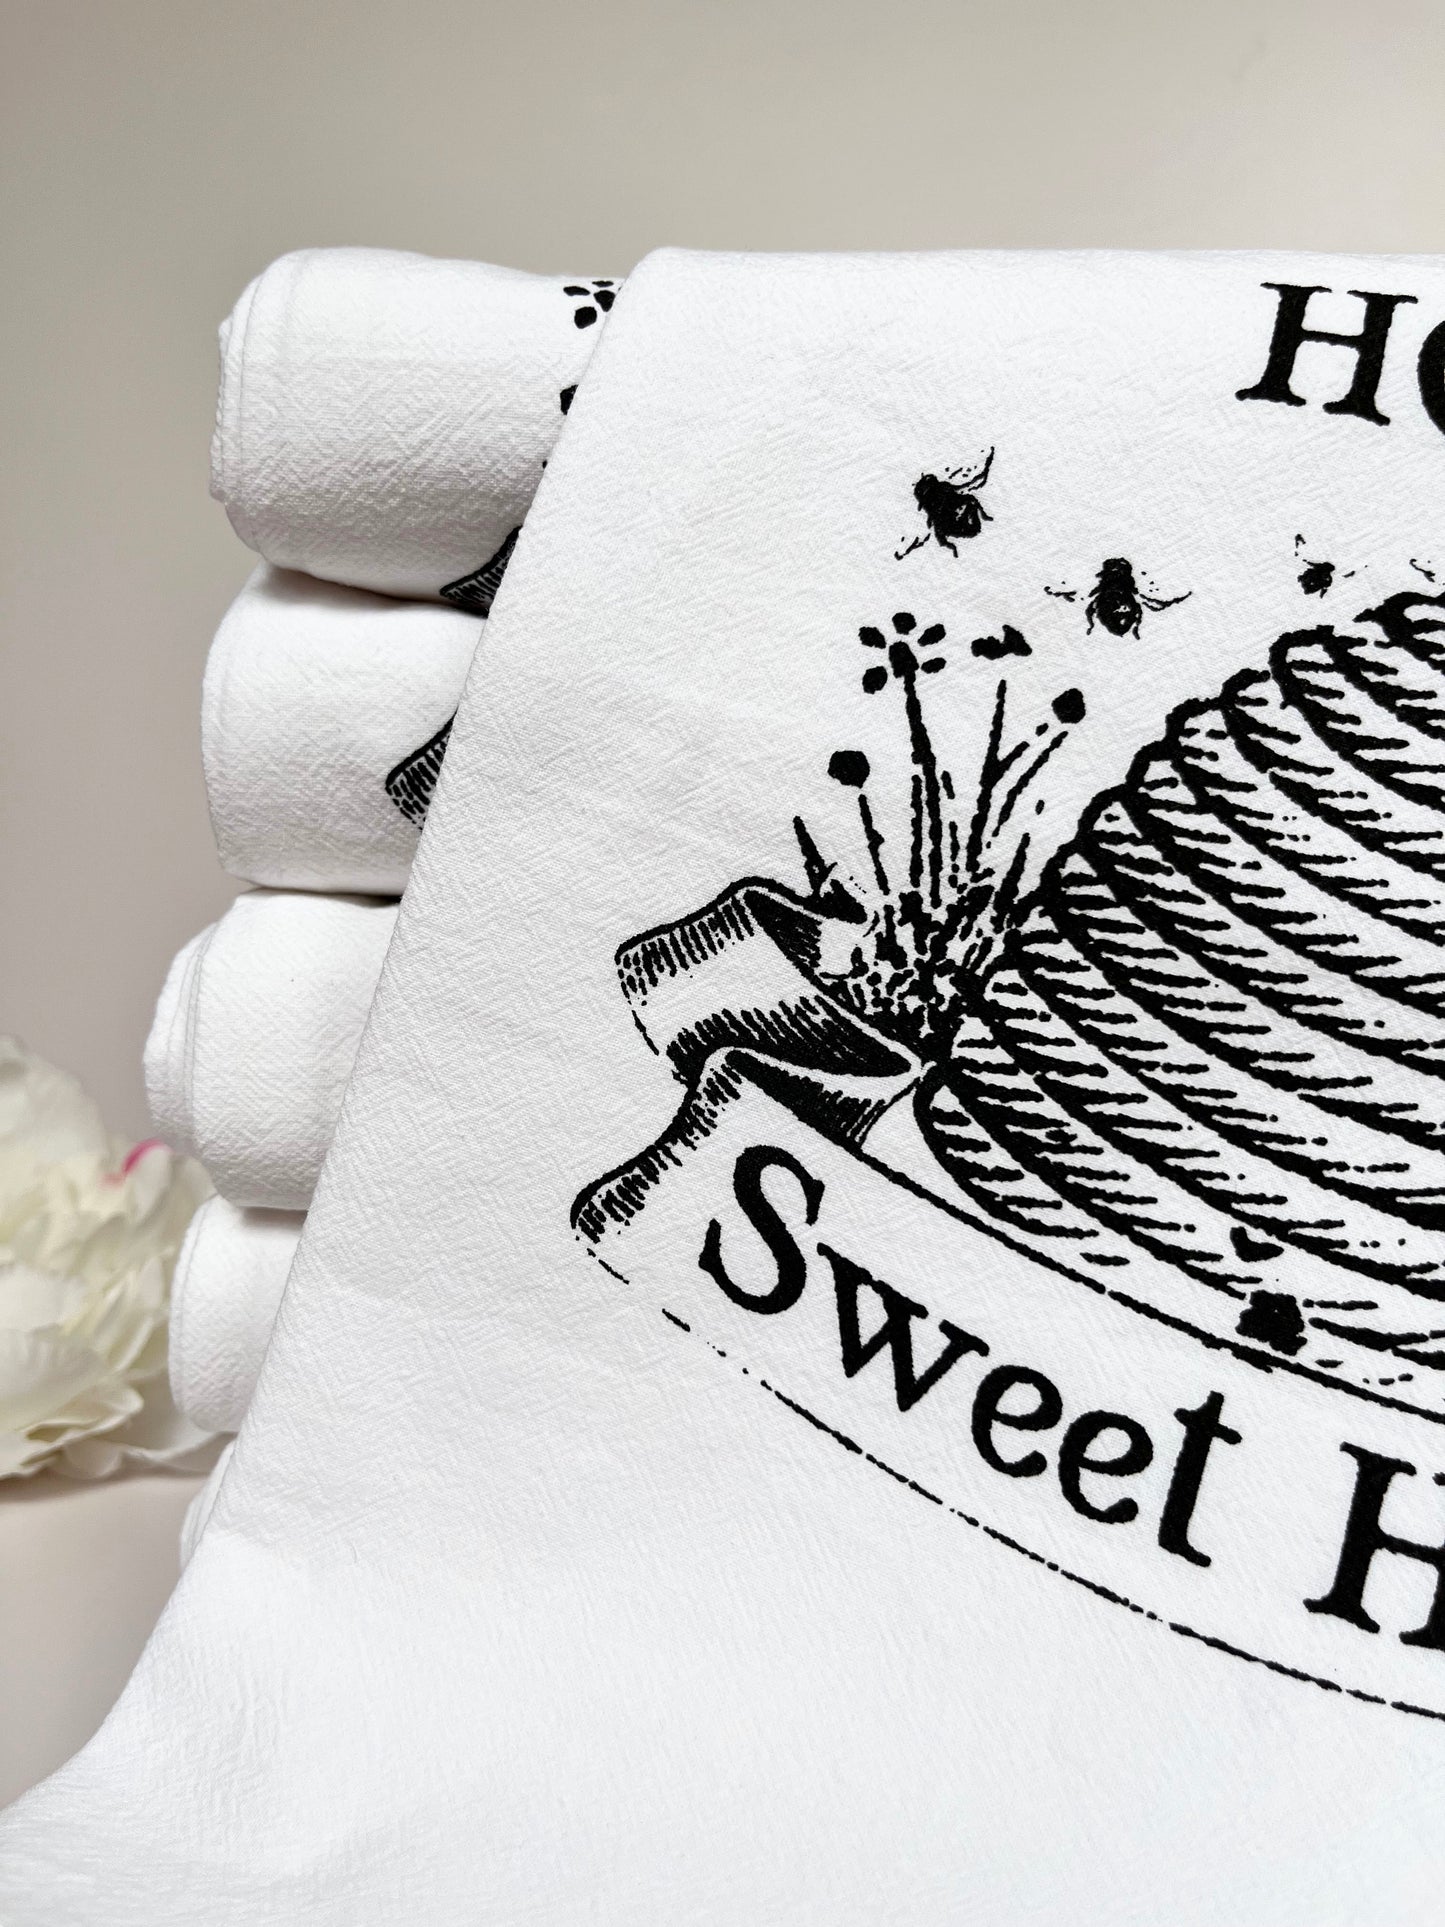 Home Sweet Home Cotton Kitchen Towel